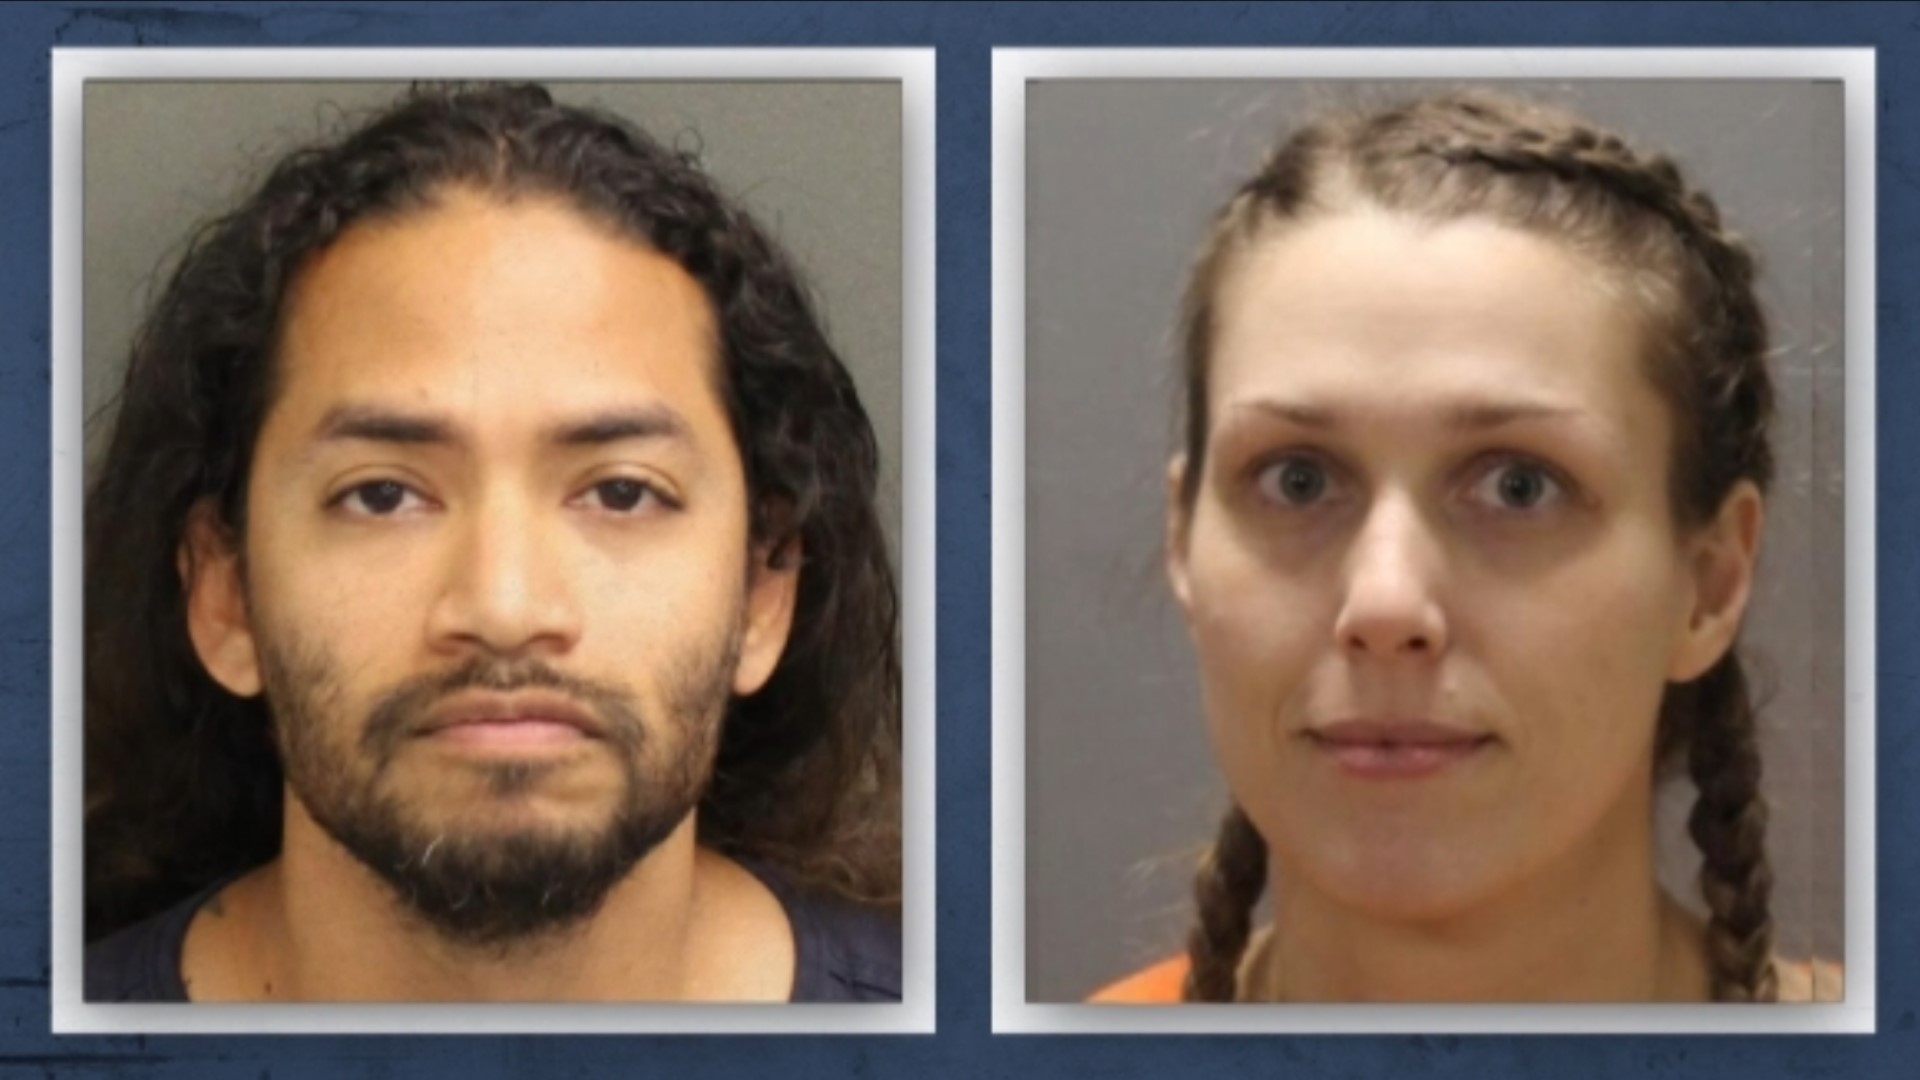 A ruling is being made on whether the SAO's 4th Judicial Circuit will remain as the prosecutors in the murder trial of Bridegan's accused killers.